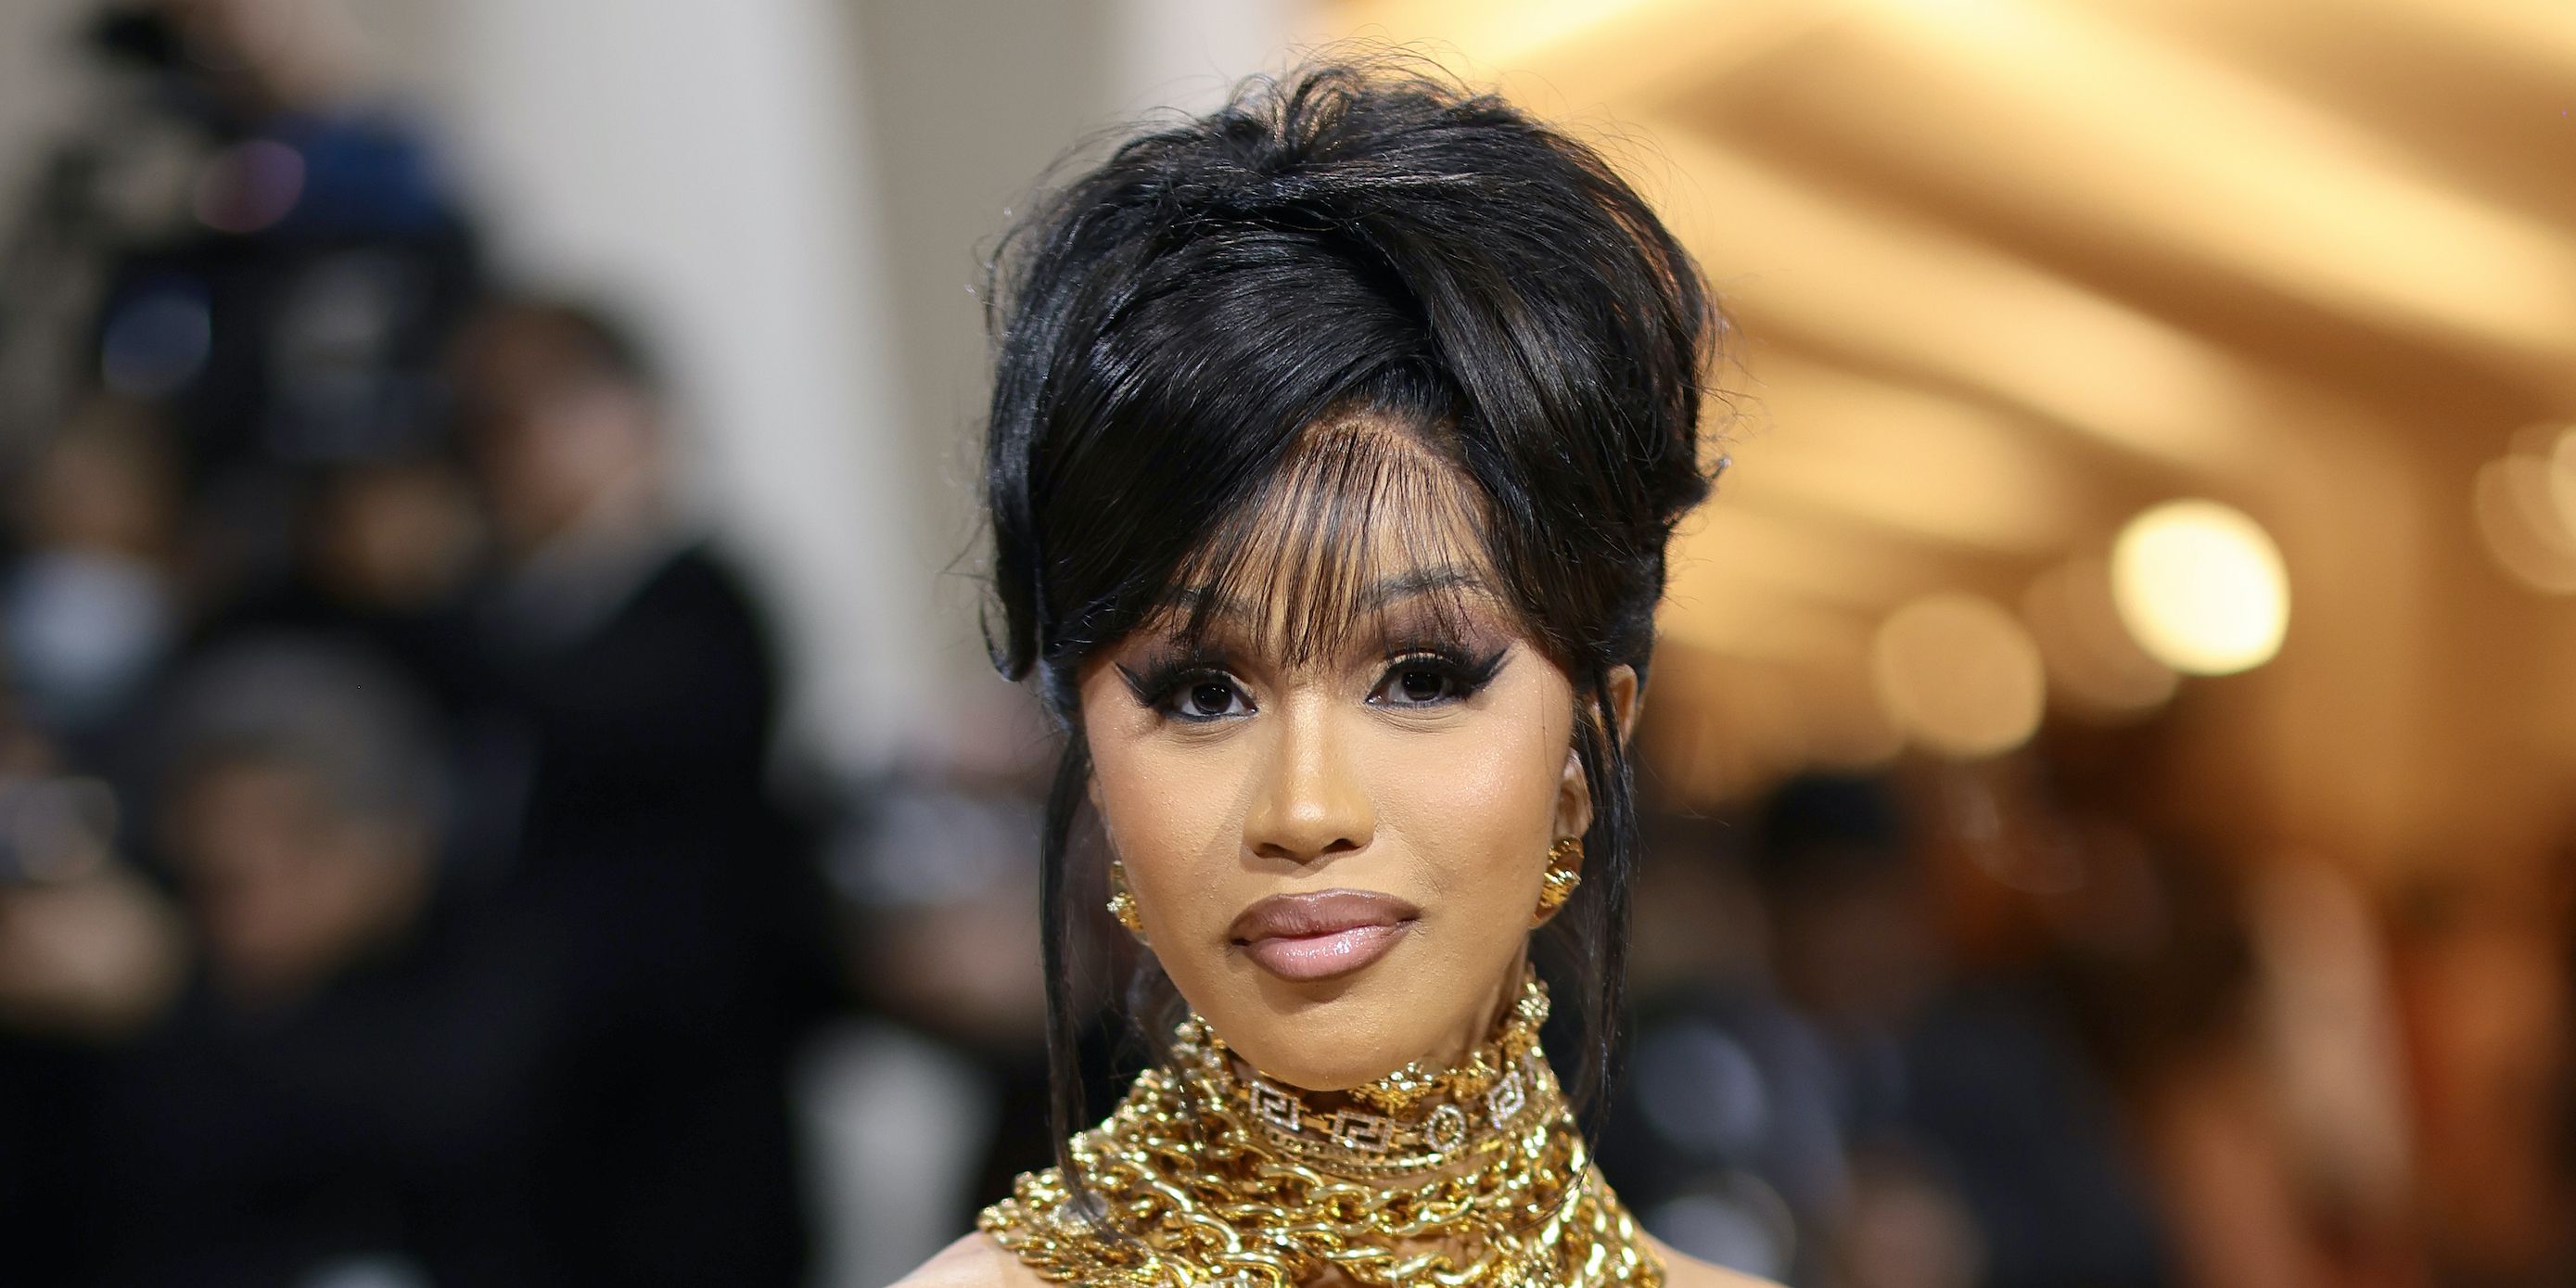 Cardi B just got real about her "mustache" in makeup-free selfie